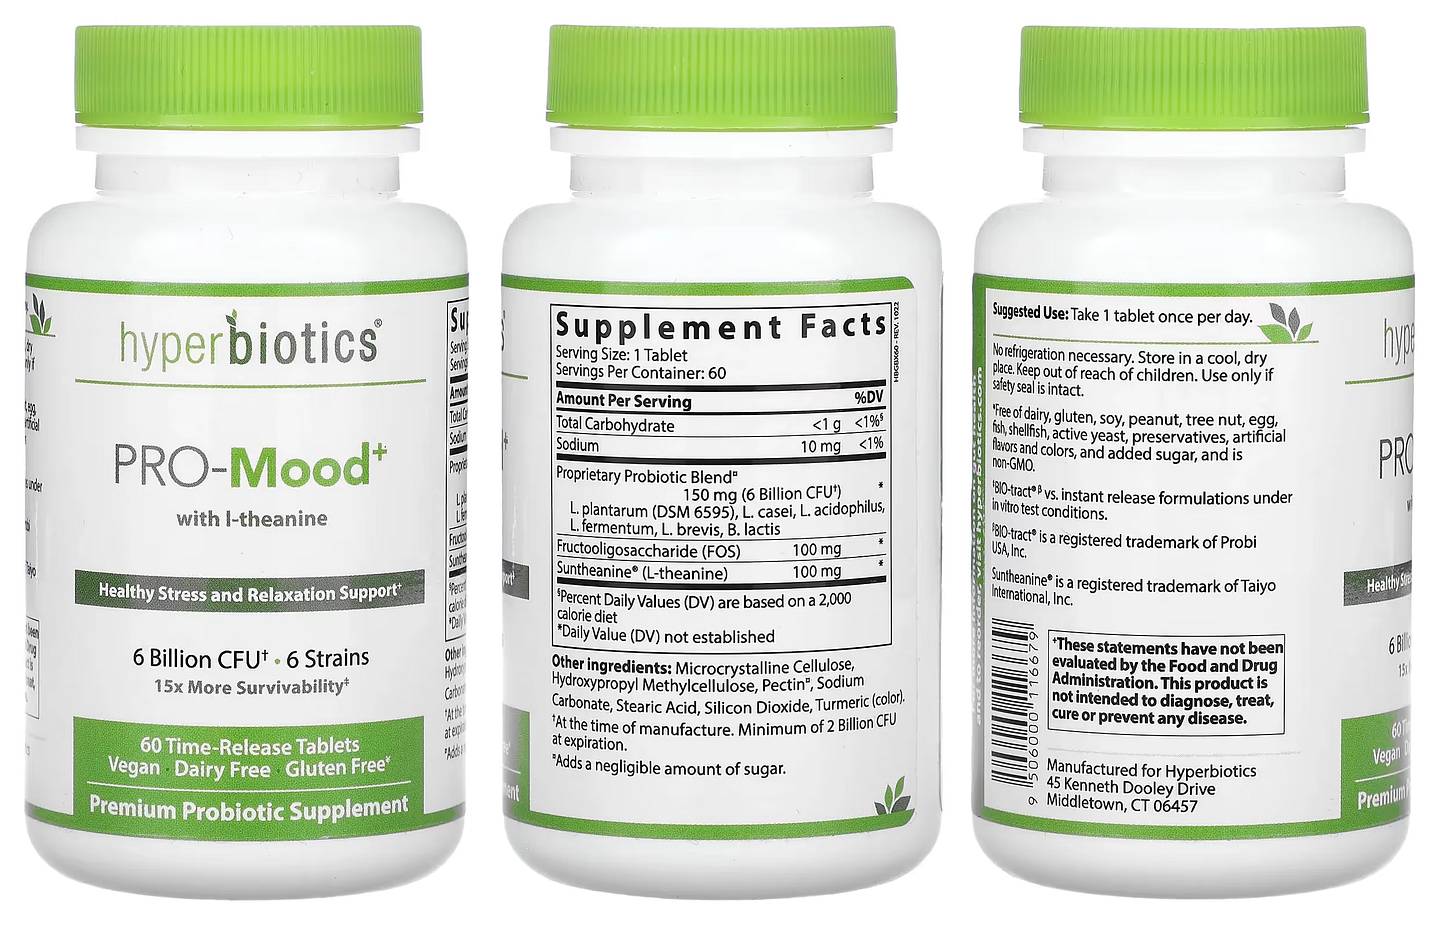 Hyperbiotics, Pro-Mood with L-Theanine packaging